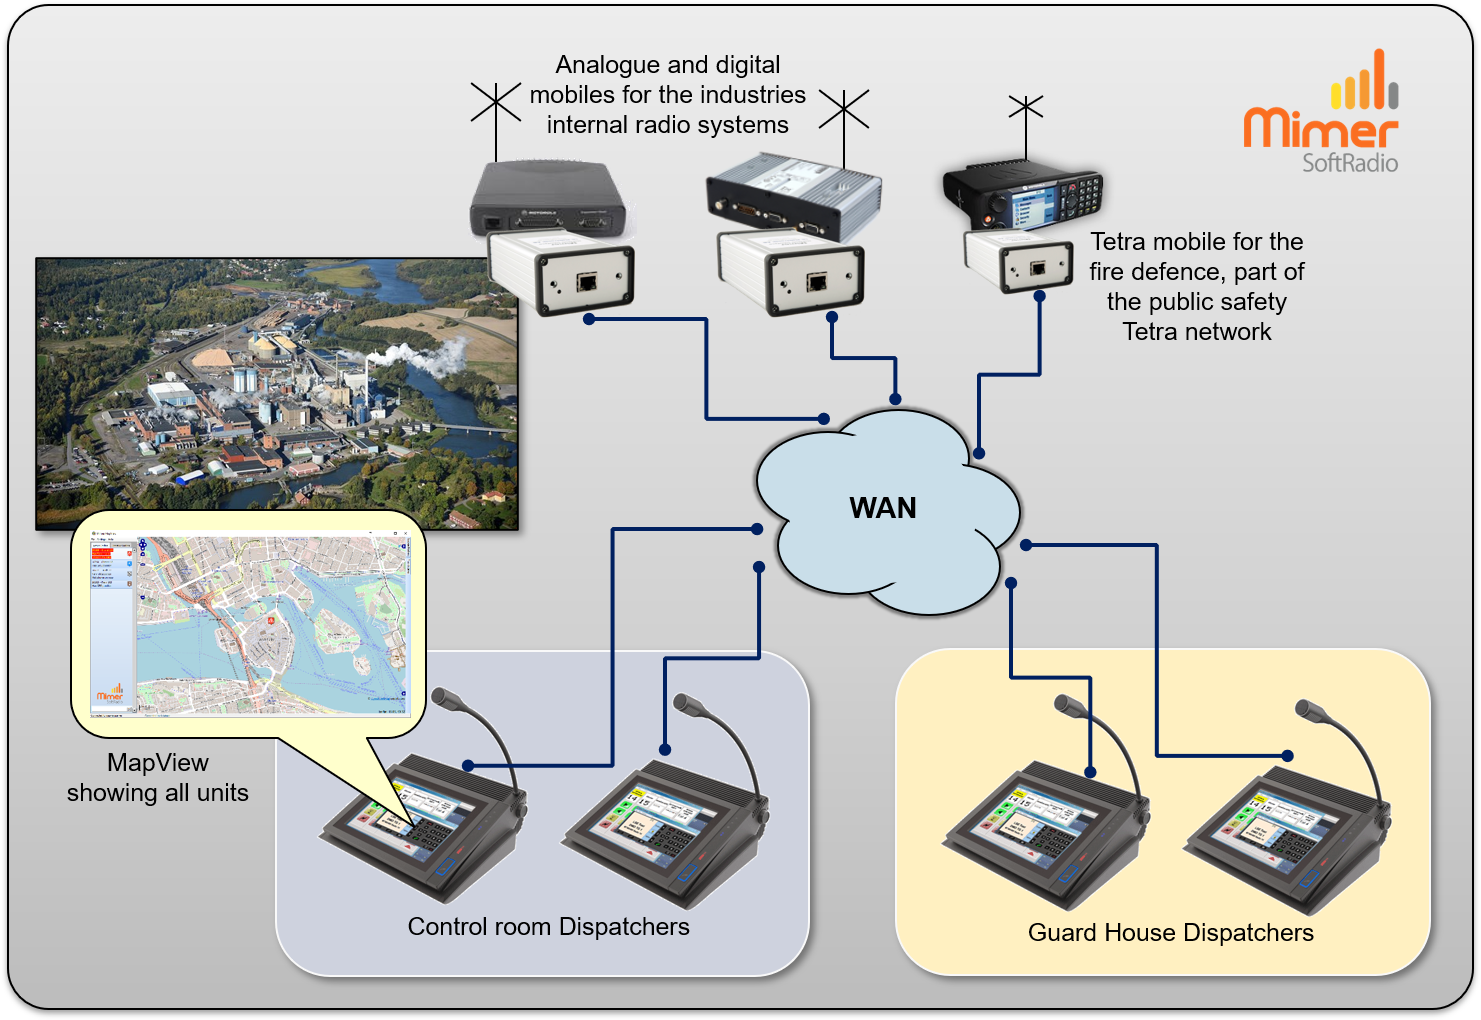 Mixed radio systems at an industry with MapView